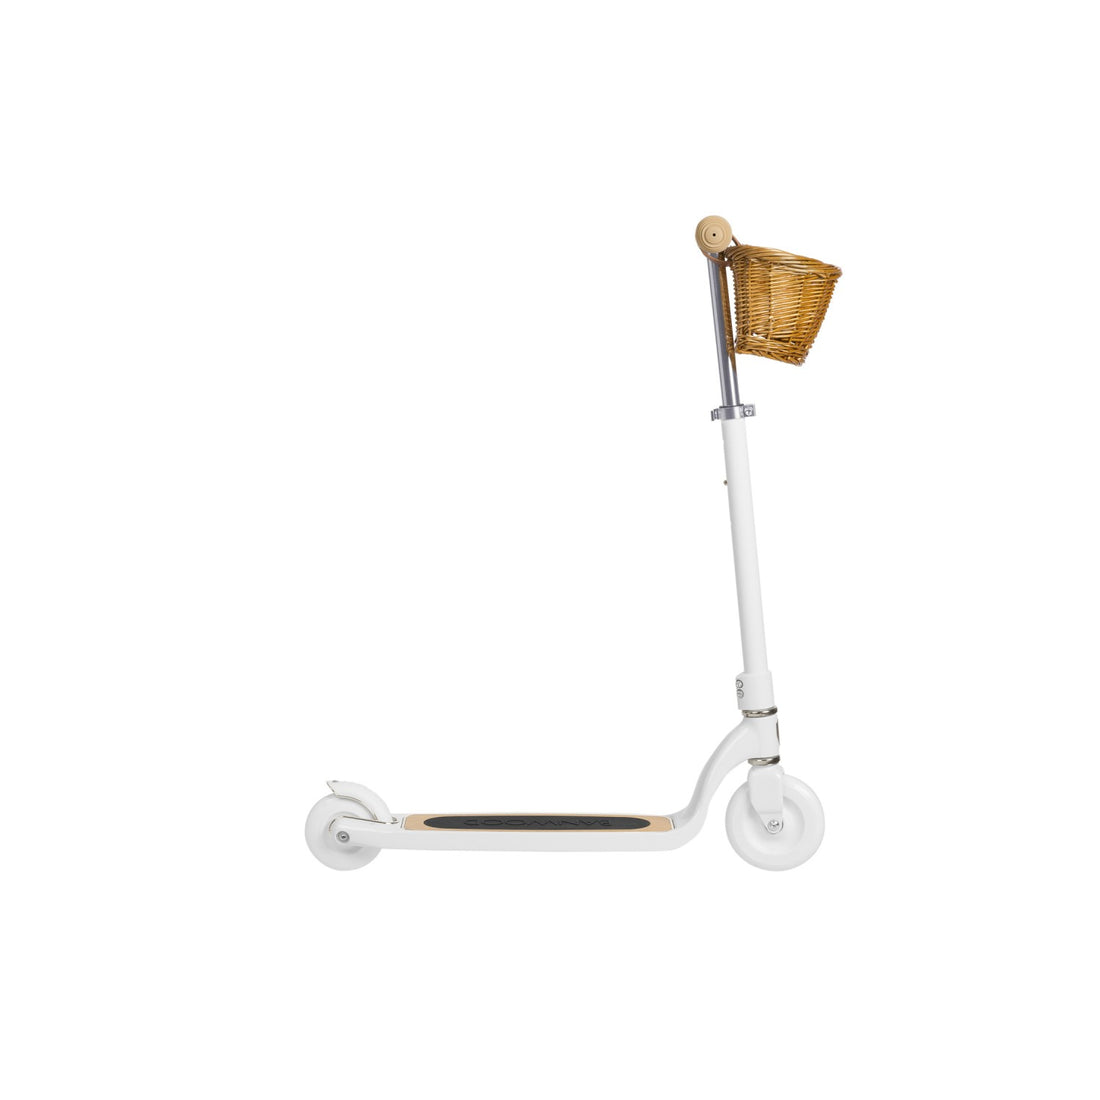 NEW Banwood Maxi Scooter with Basket - White